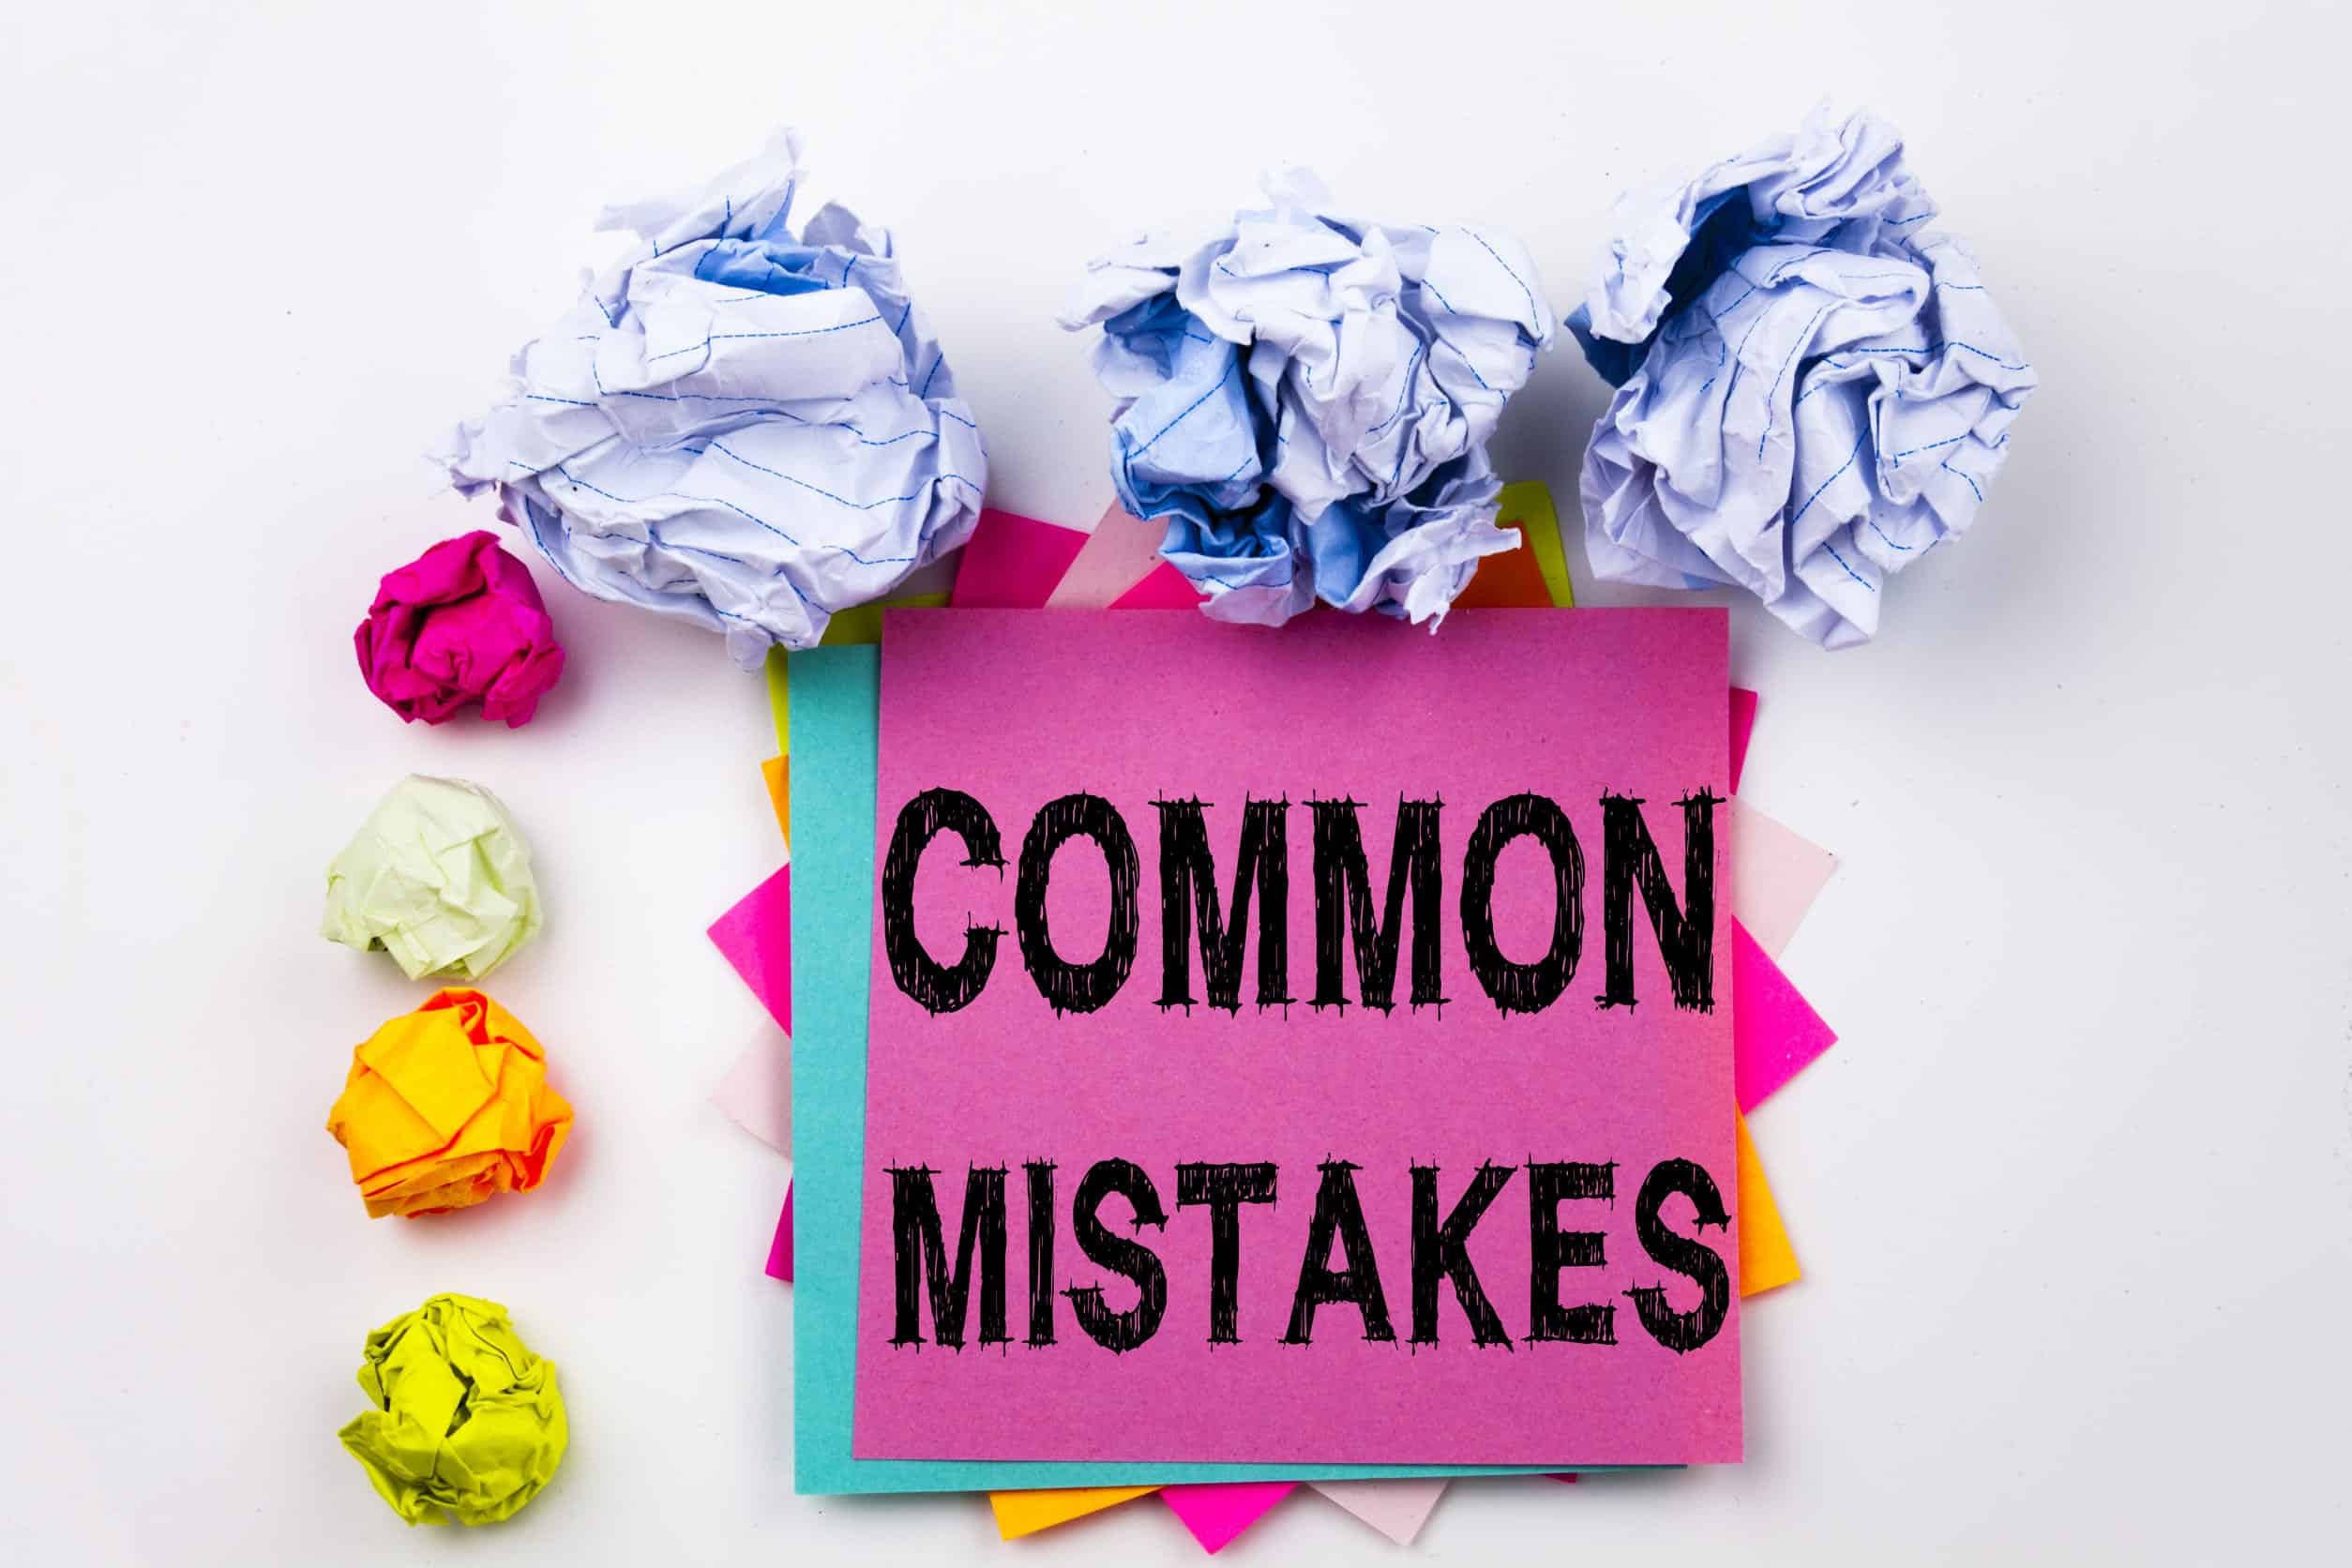 New Leaders Need to Avoid These Common Mistakes